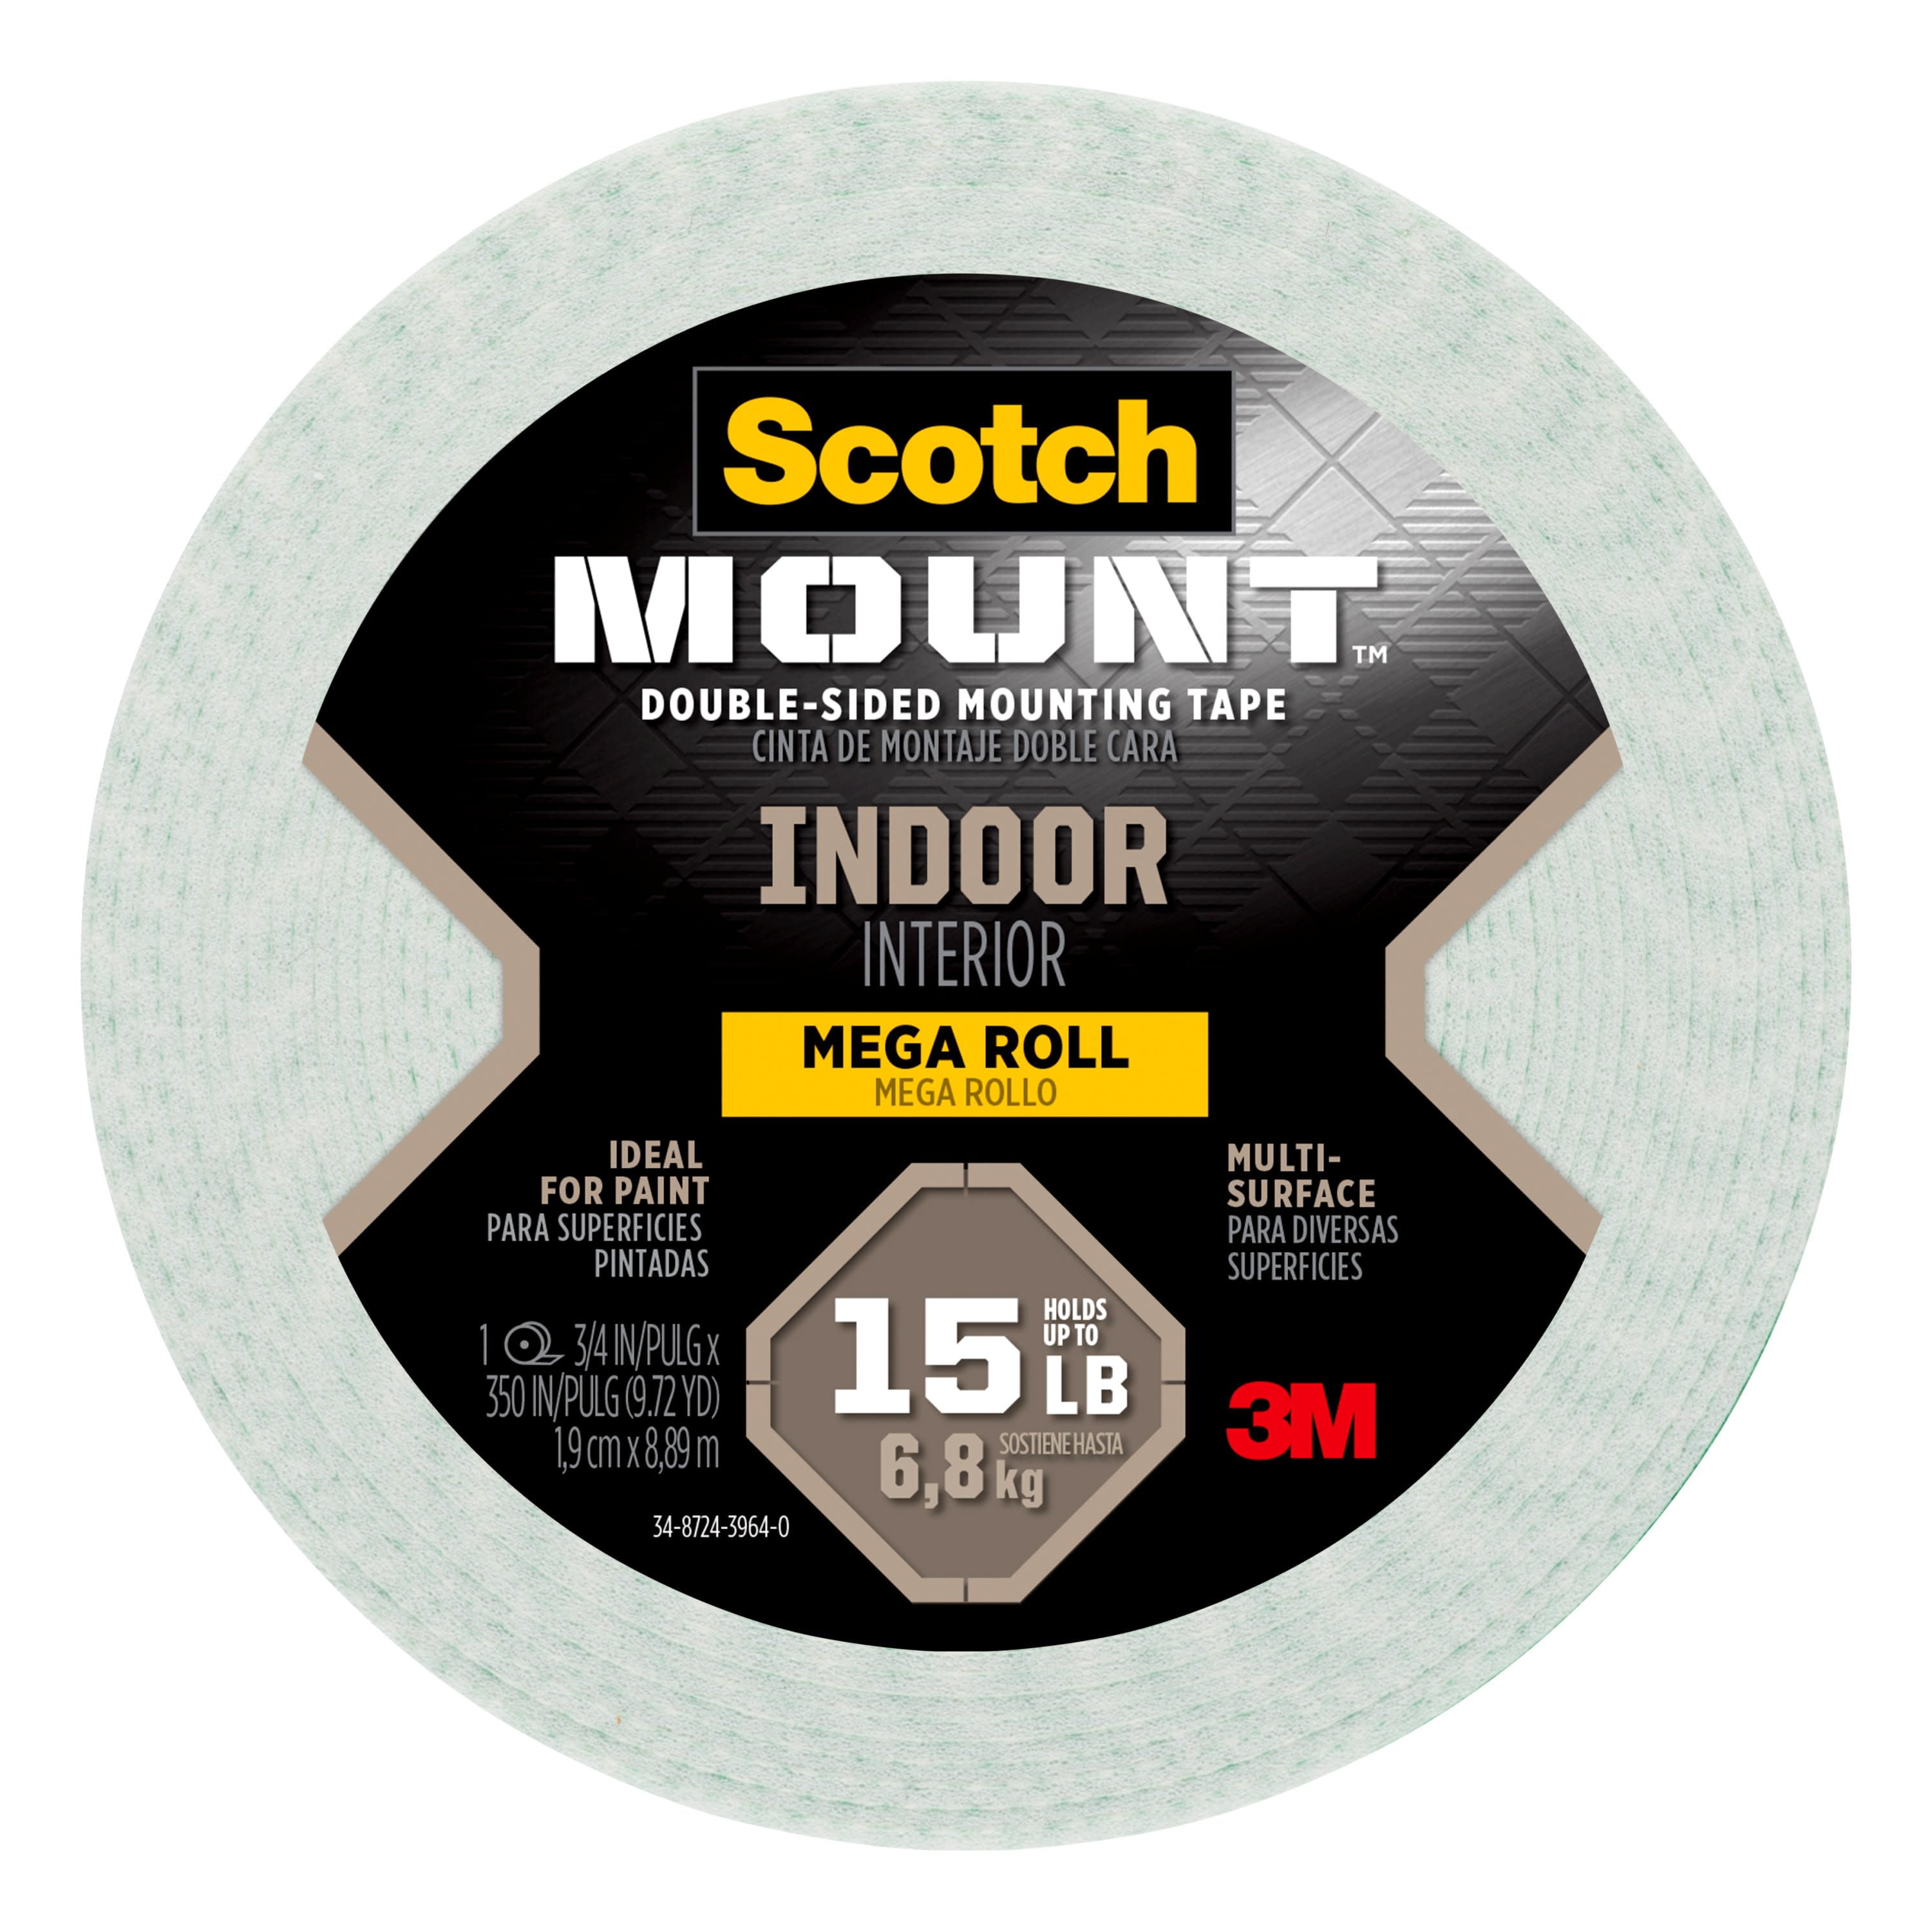 Scotch Indoor Double-Sided Mounting Tape, White, 3/4 in x 350 in, 1 Roll